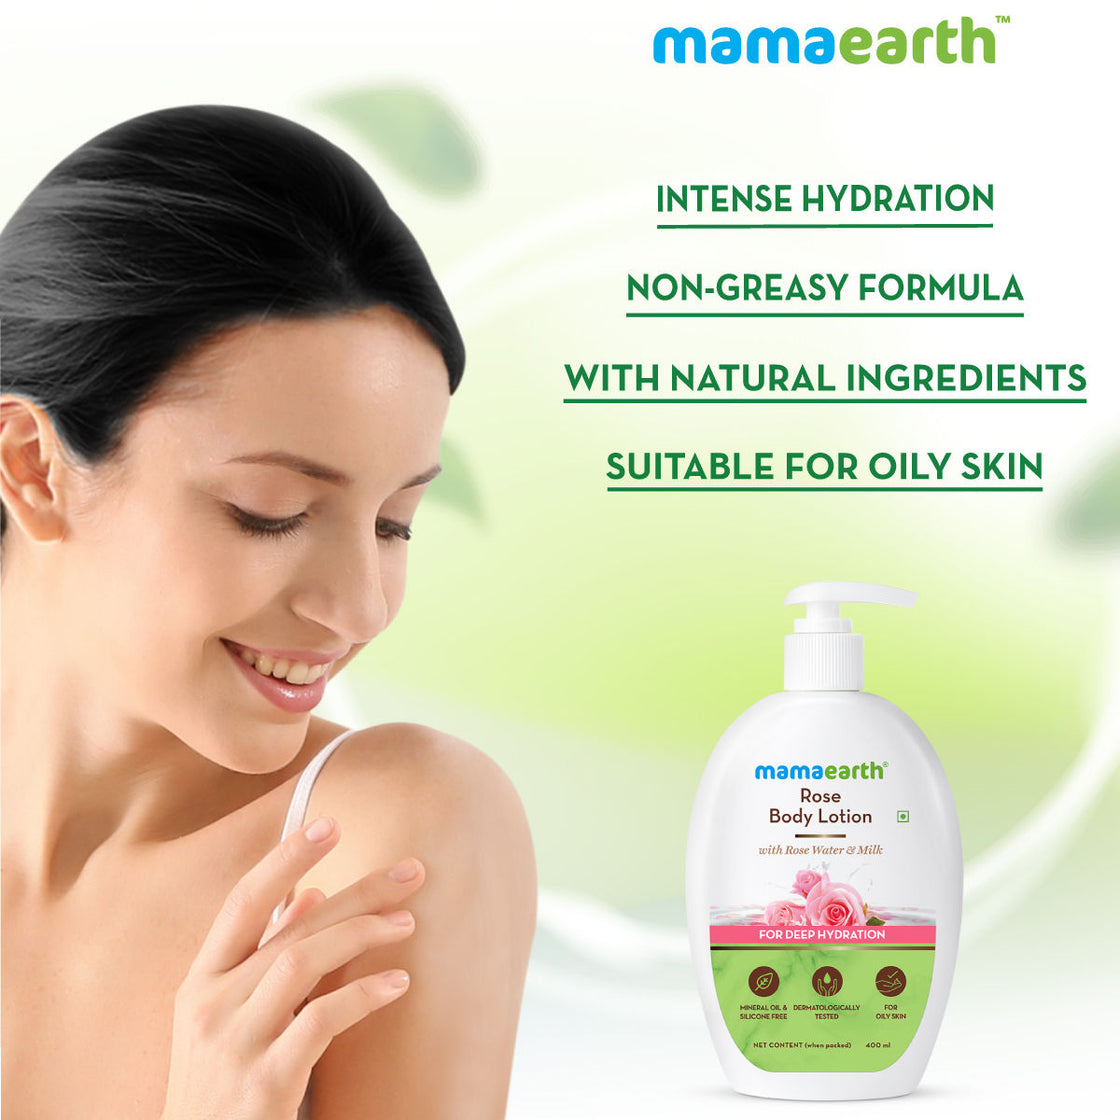 Mamaearth Rose Body Lotion With Rose Water And Milk For Deep Hydration-3